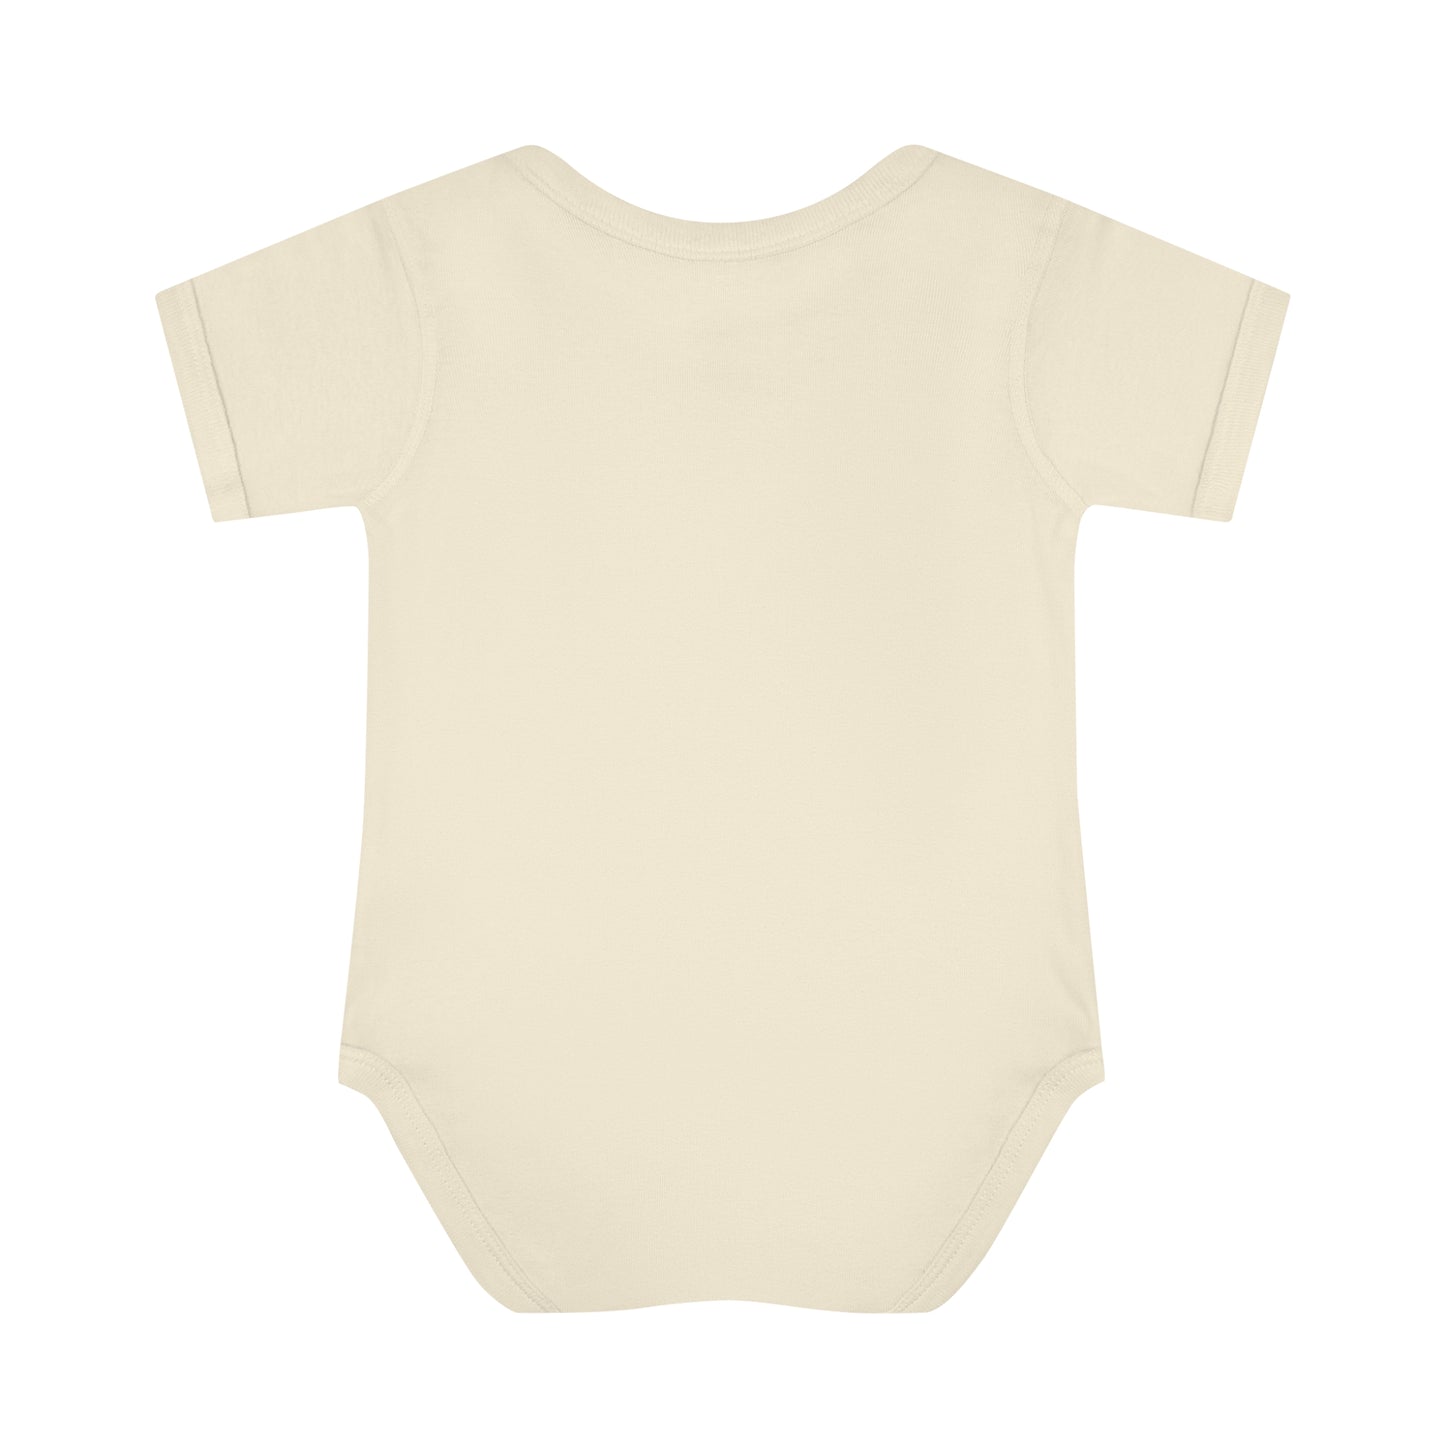 Maui Strong graphic Infant Baby Rib Bodysuit